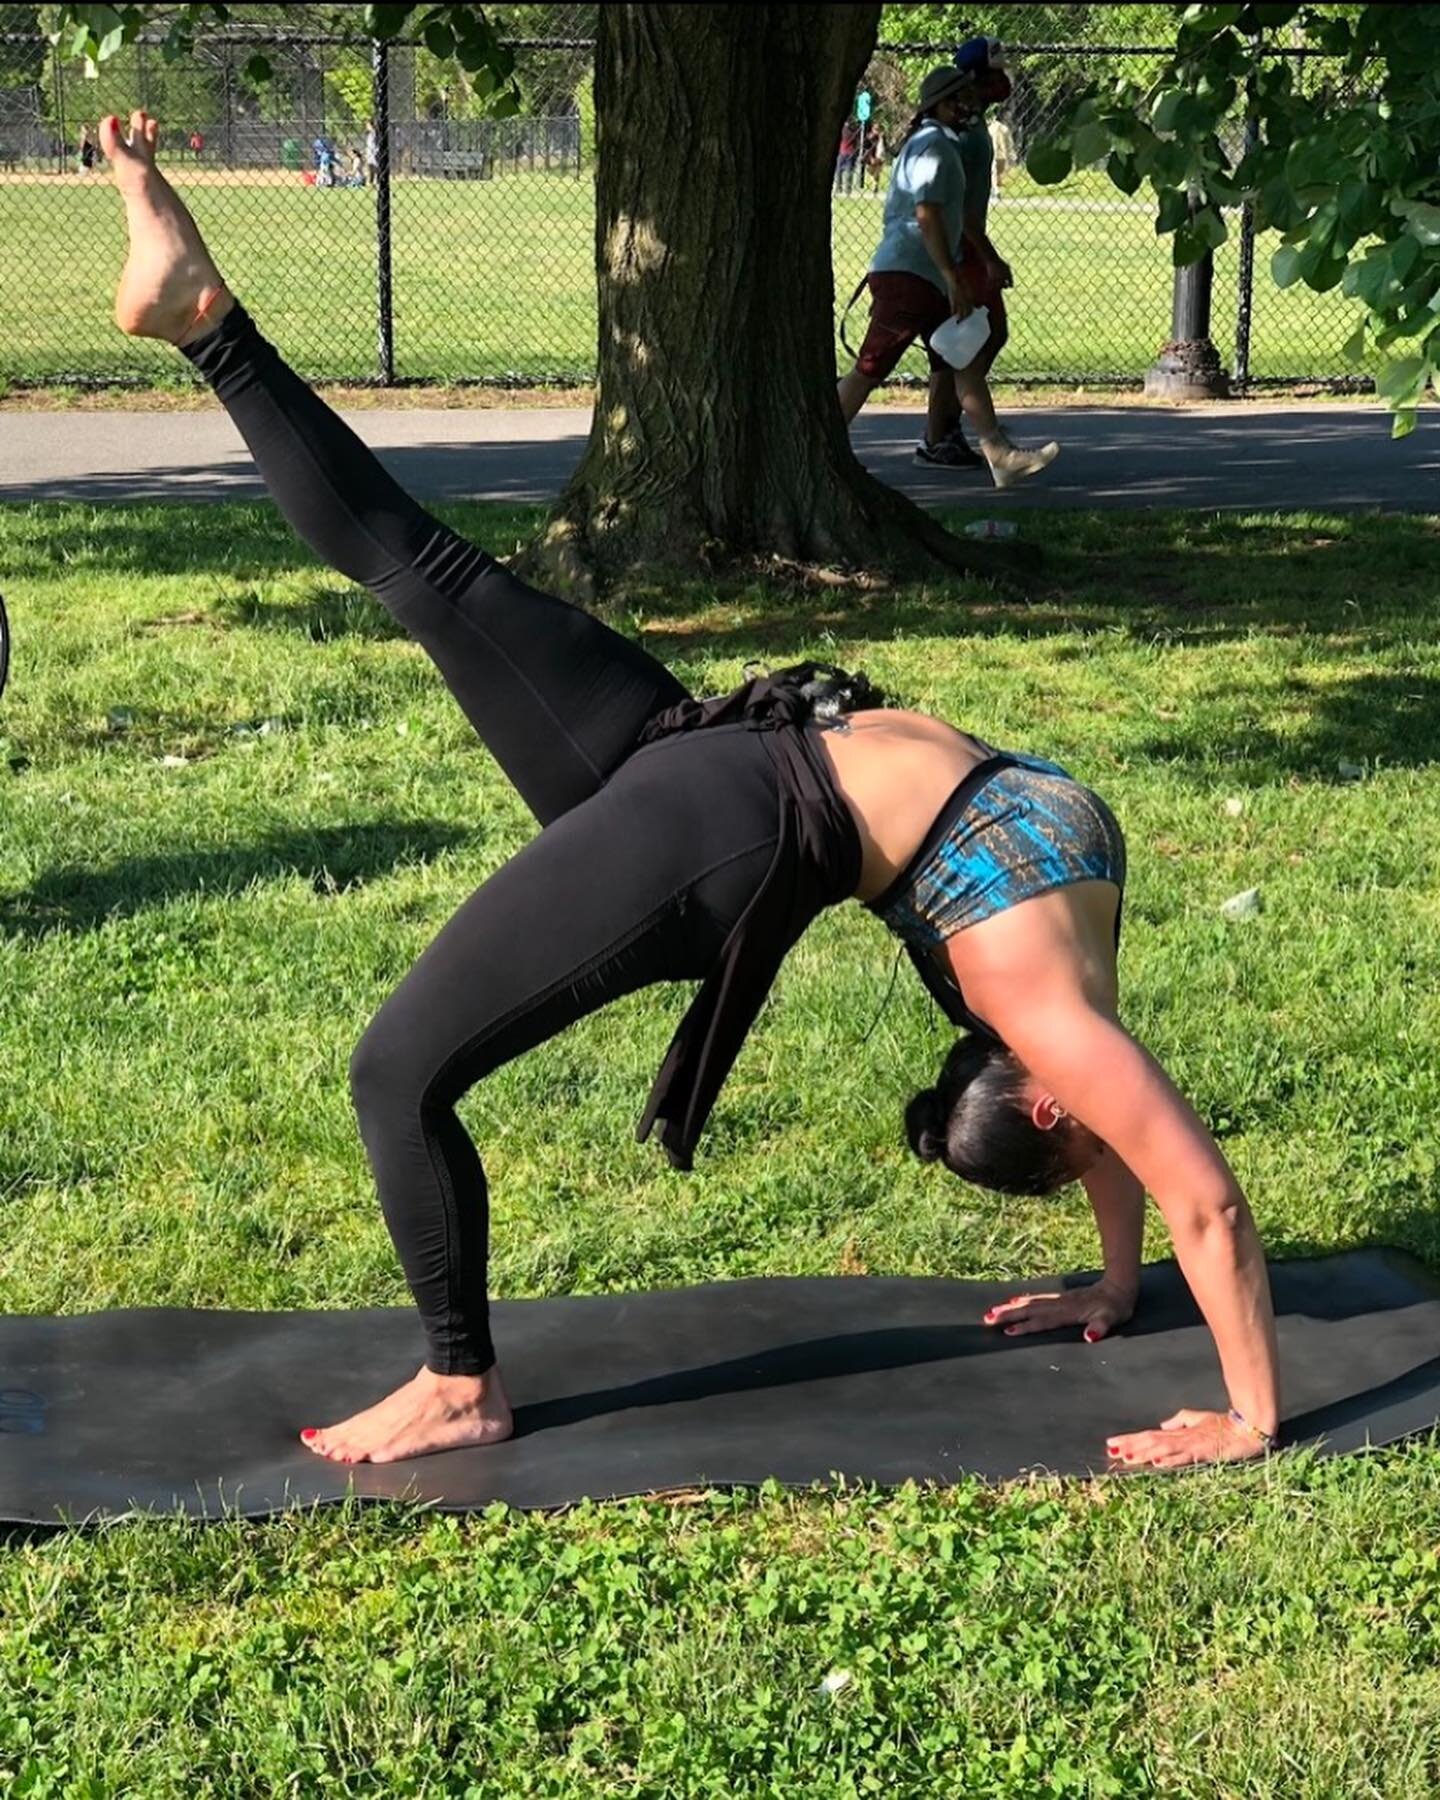 Meet Catherine Llopis! 

Catherine&rsquo;s yoga journey started back in 2005 at crunch fitness in soho after her boxing trainer at the time made the suggestion to her. She has been a yoga practitioner, on and off, ever since. Until 2016, when she dec